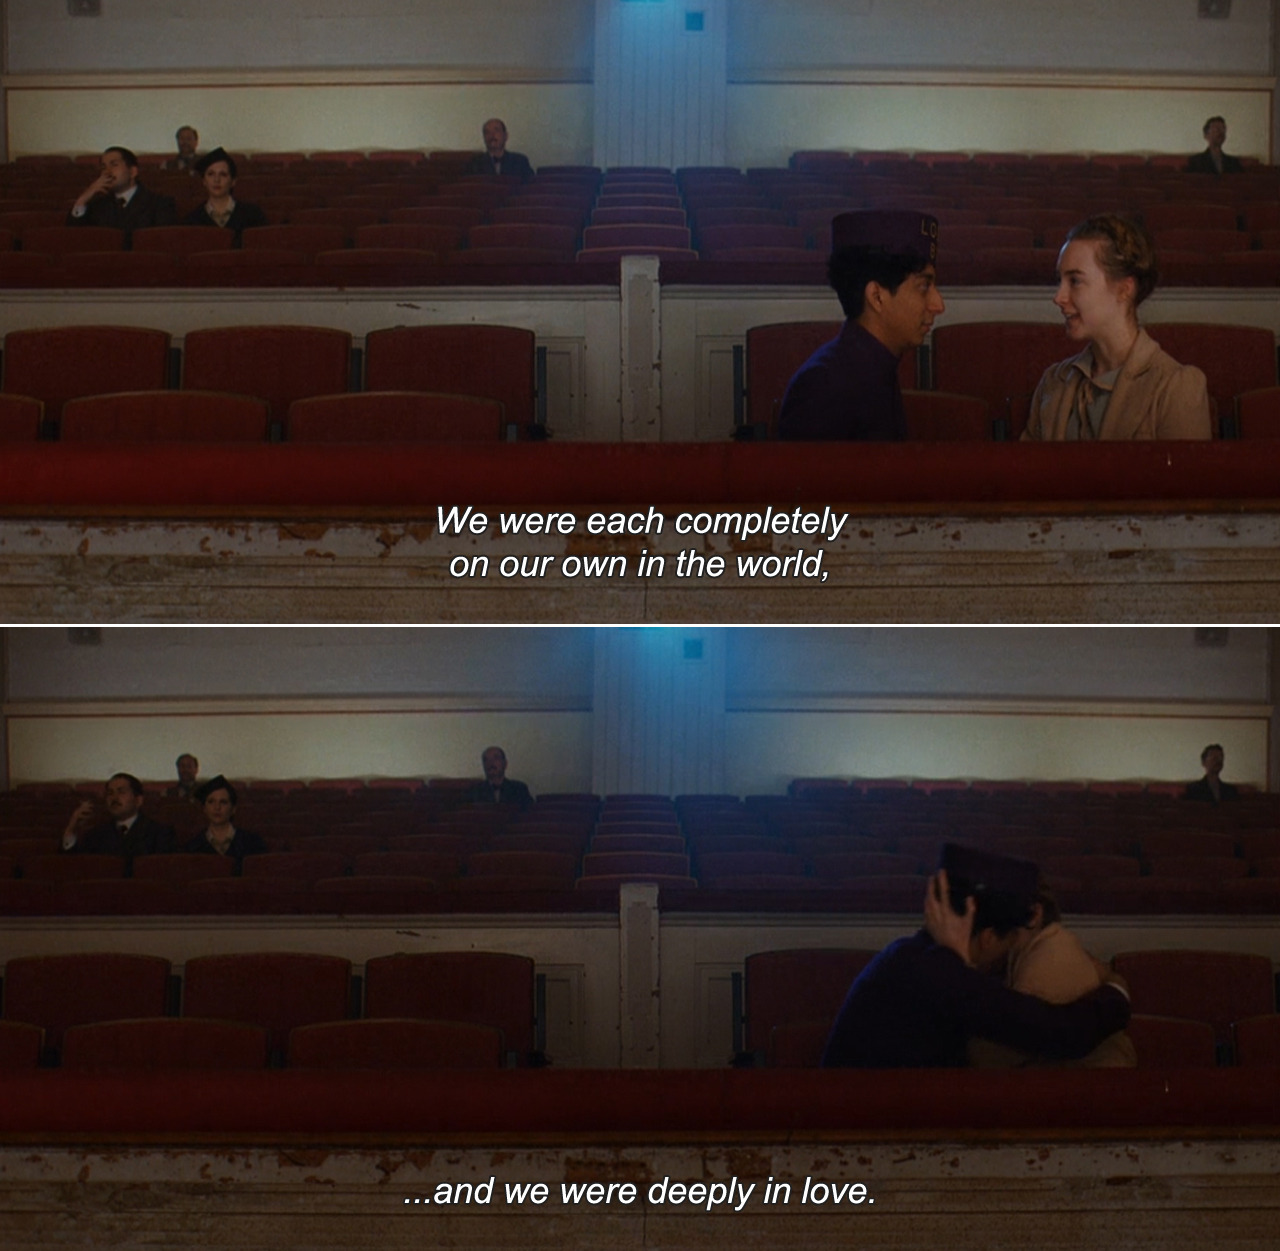 anamorphosis-and-isolate:   ― The Grand Budapest Hotel (2014) Zero: We were each